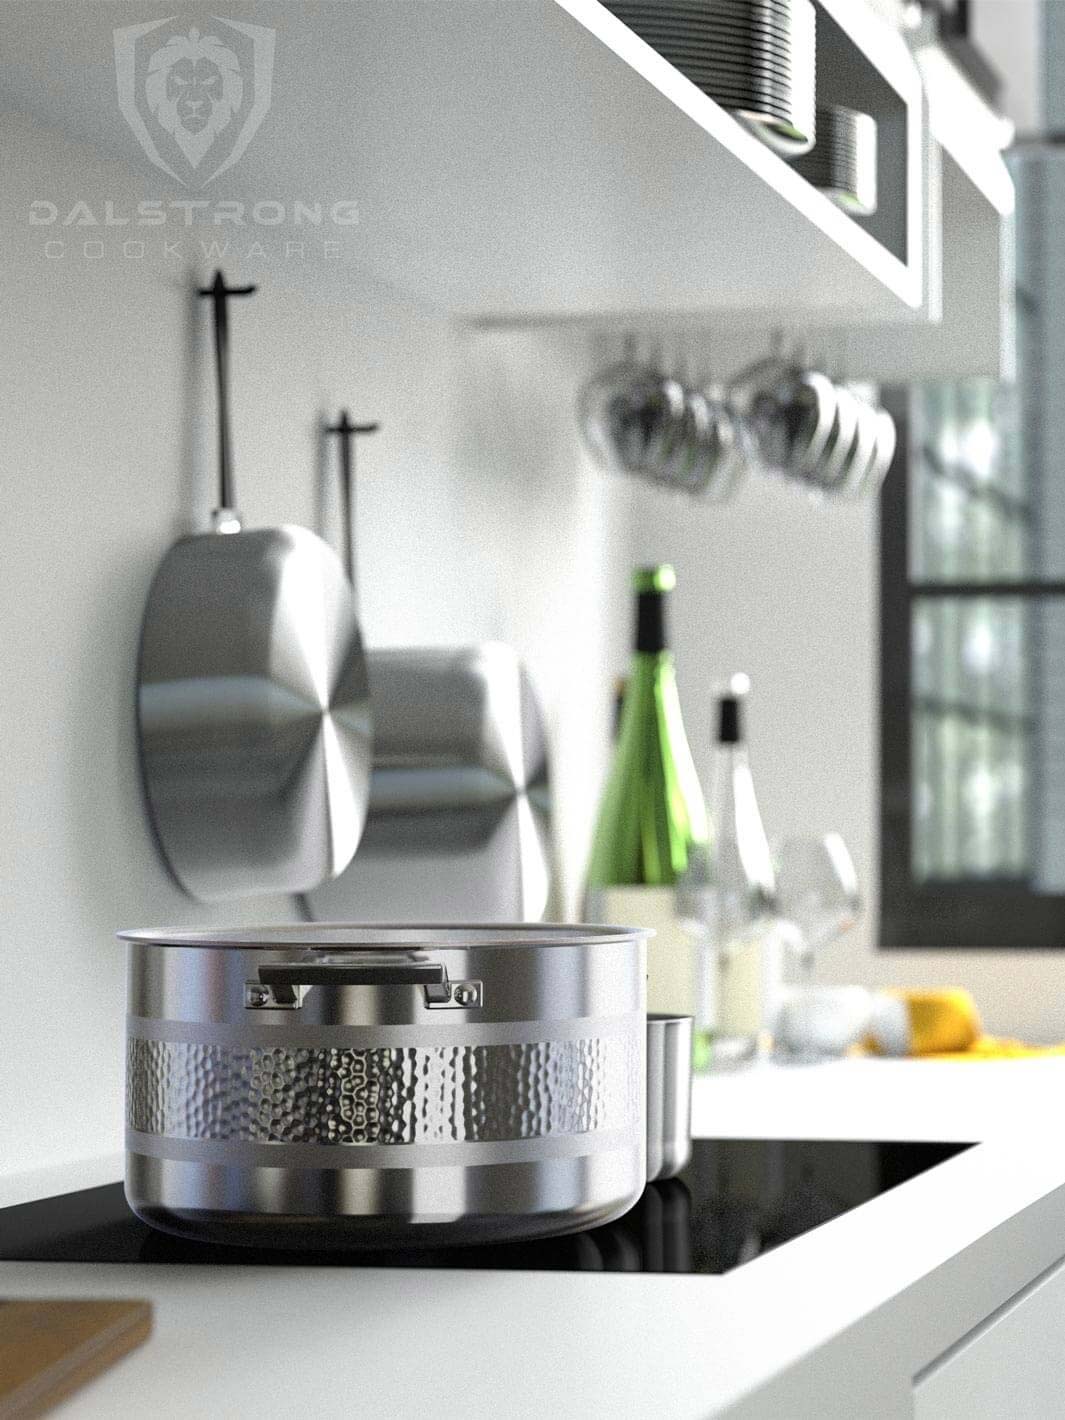 Dalstrong avalon series 8 quart stock pot hammered finish silver on a stove top.